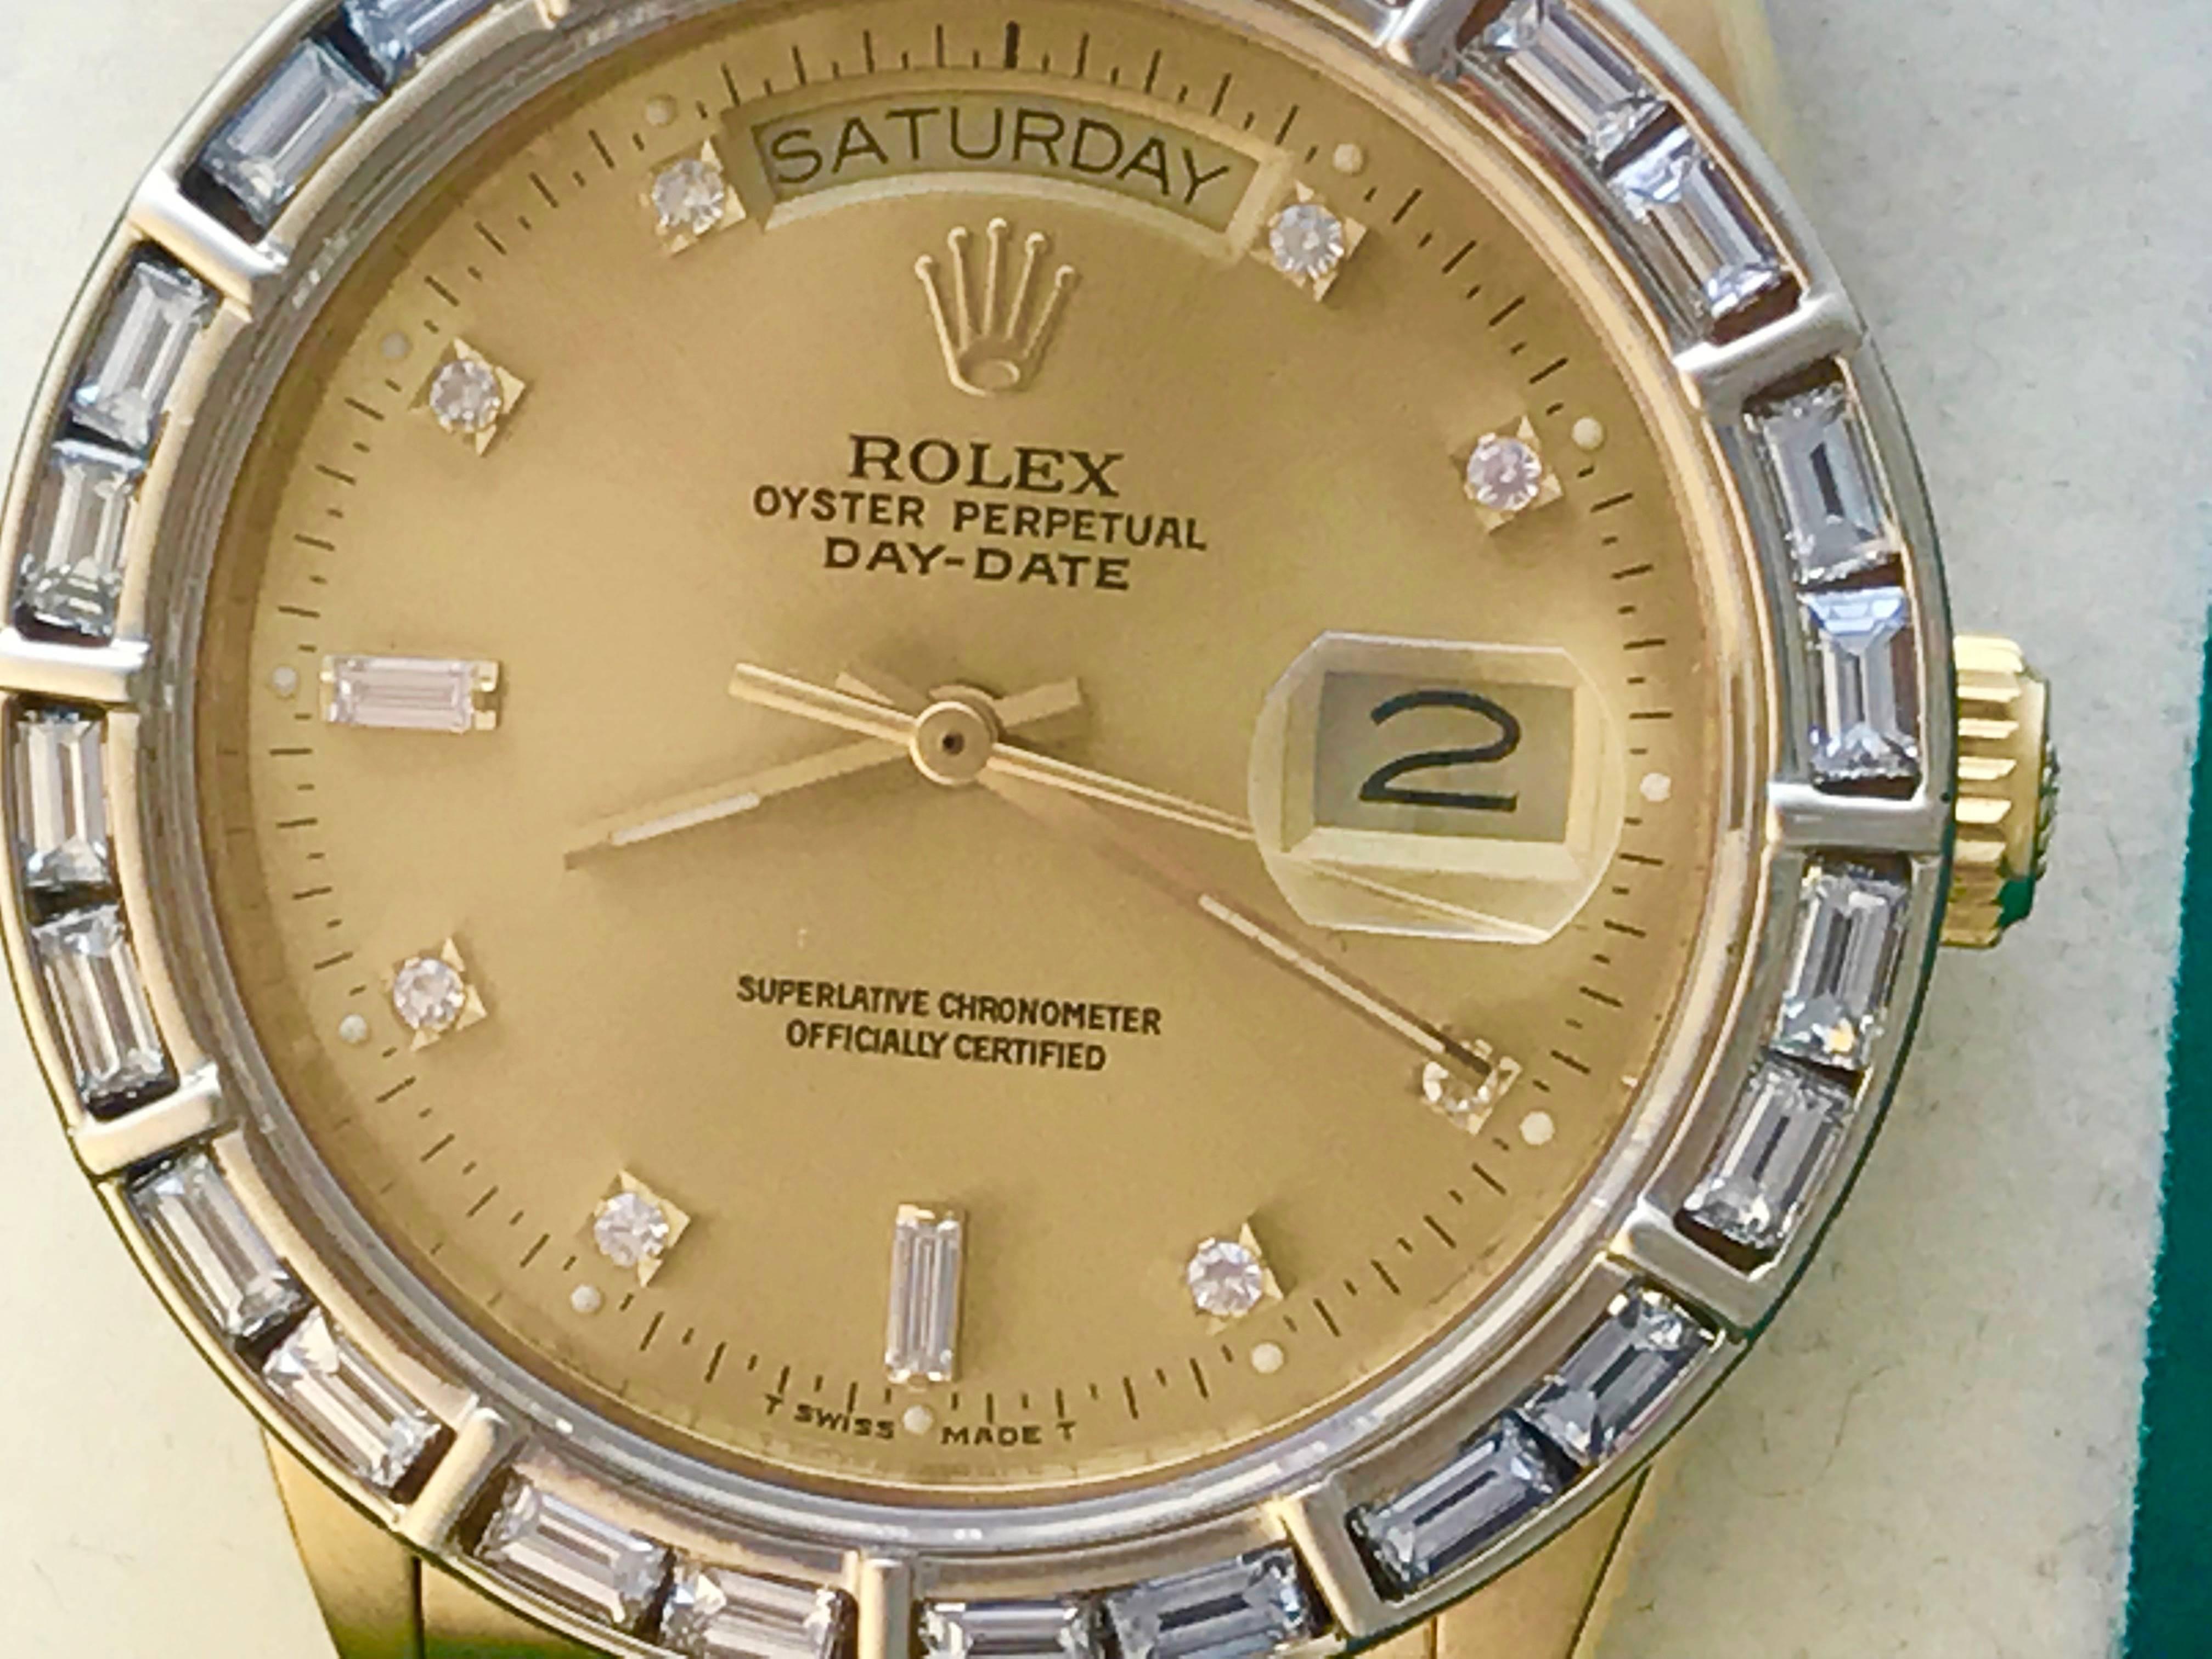 Rolex President Day-Date Model 18038 Pre Owned Mens Oyster Perpetual Automatic wrist watch. Champagne Dial with custom Diamond hour markers (8 round and 2 baguettes). 18k Yellow Gold case with custom 4 ct. baguette Diamond bezel (35mm). 18k Yellow